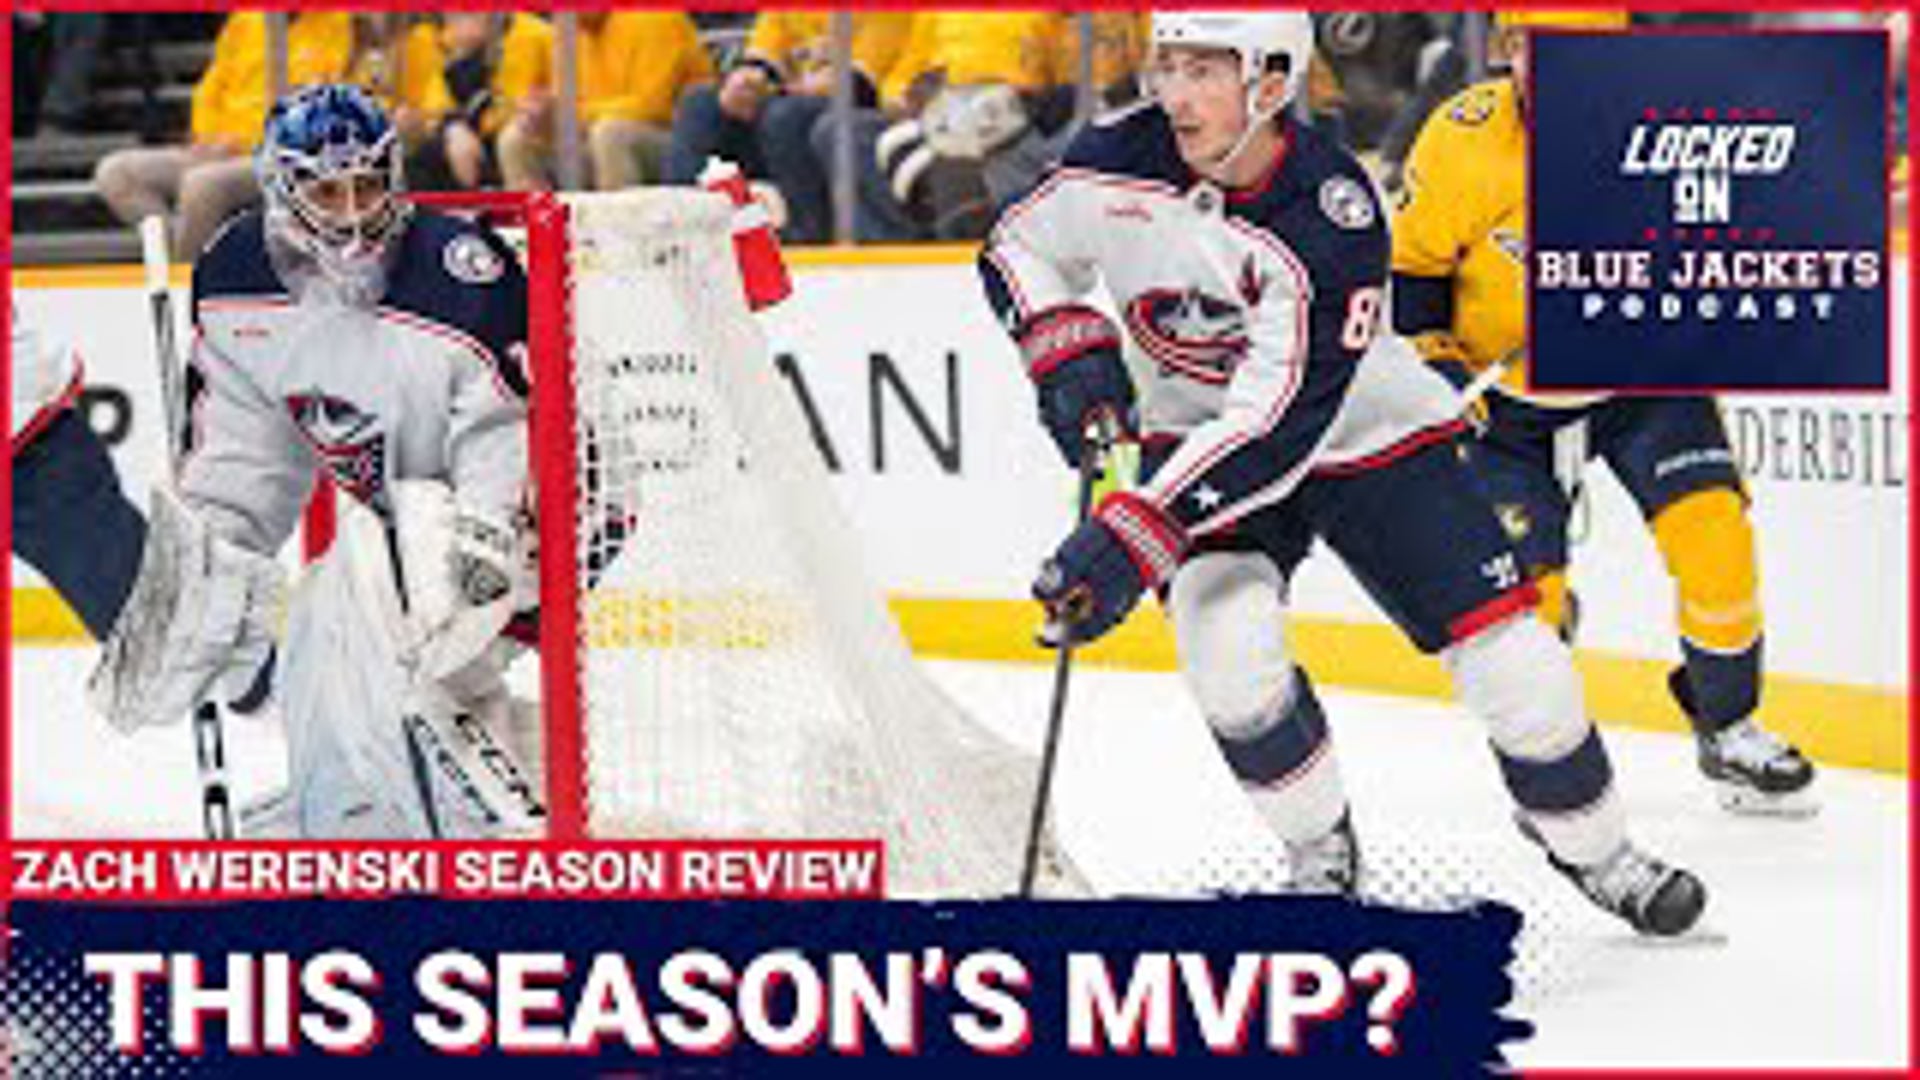 Zach Werenski had a great offensive season, was mostly healthy, and was close to the defencemen we think he can be. He suffered from inconsistent coaching.